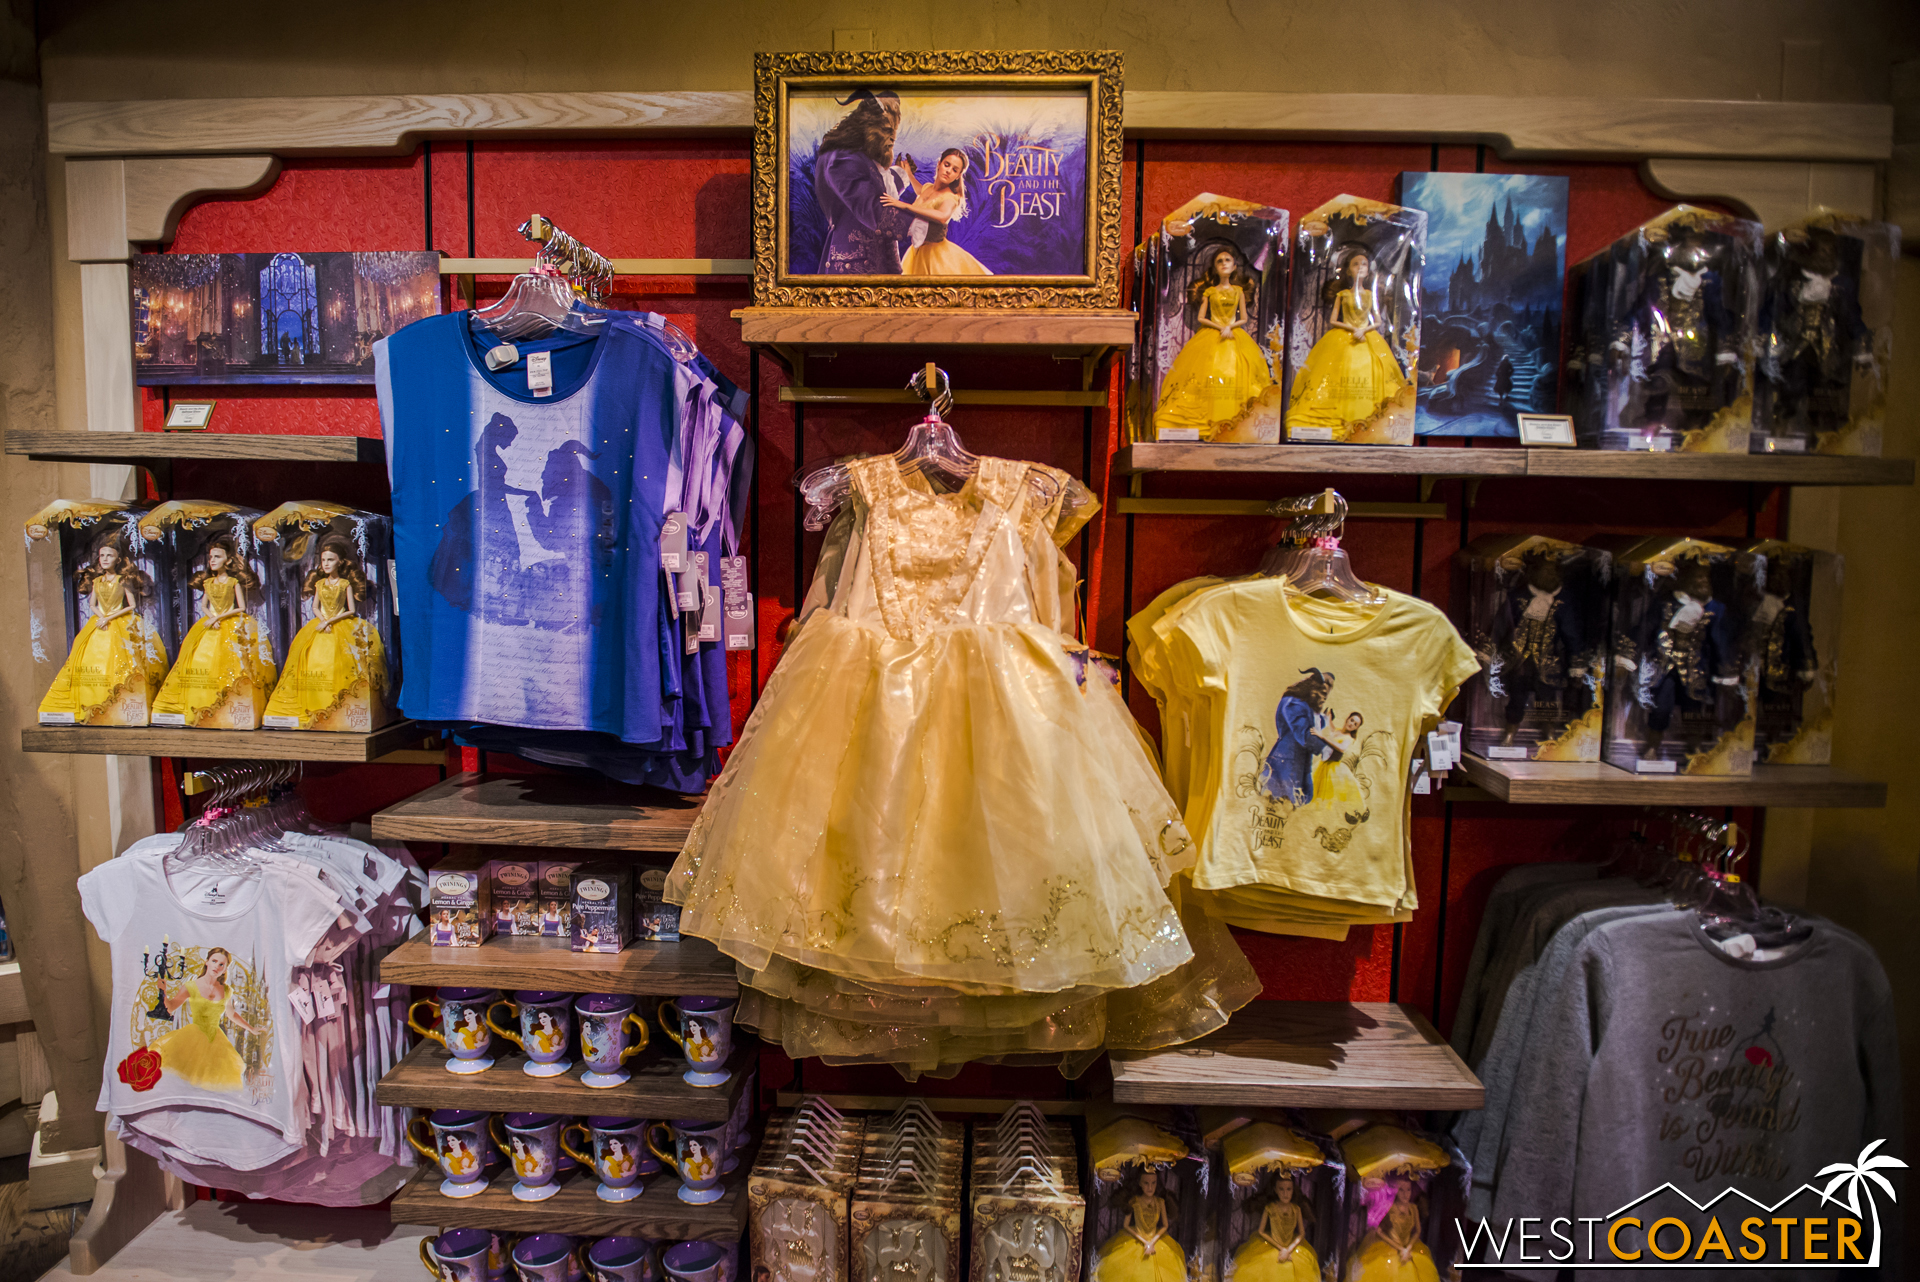  Plenty of merchandise for  Beauty and the Beast  fans, though! 